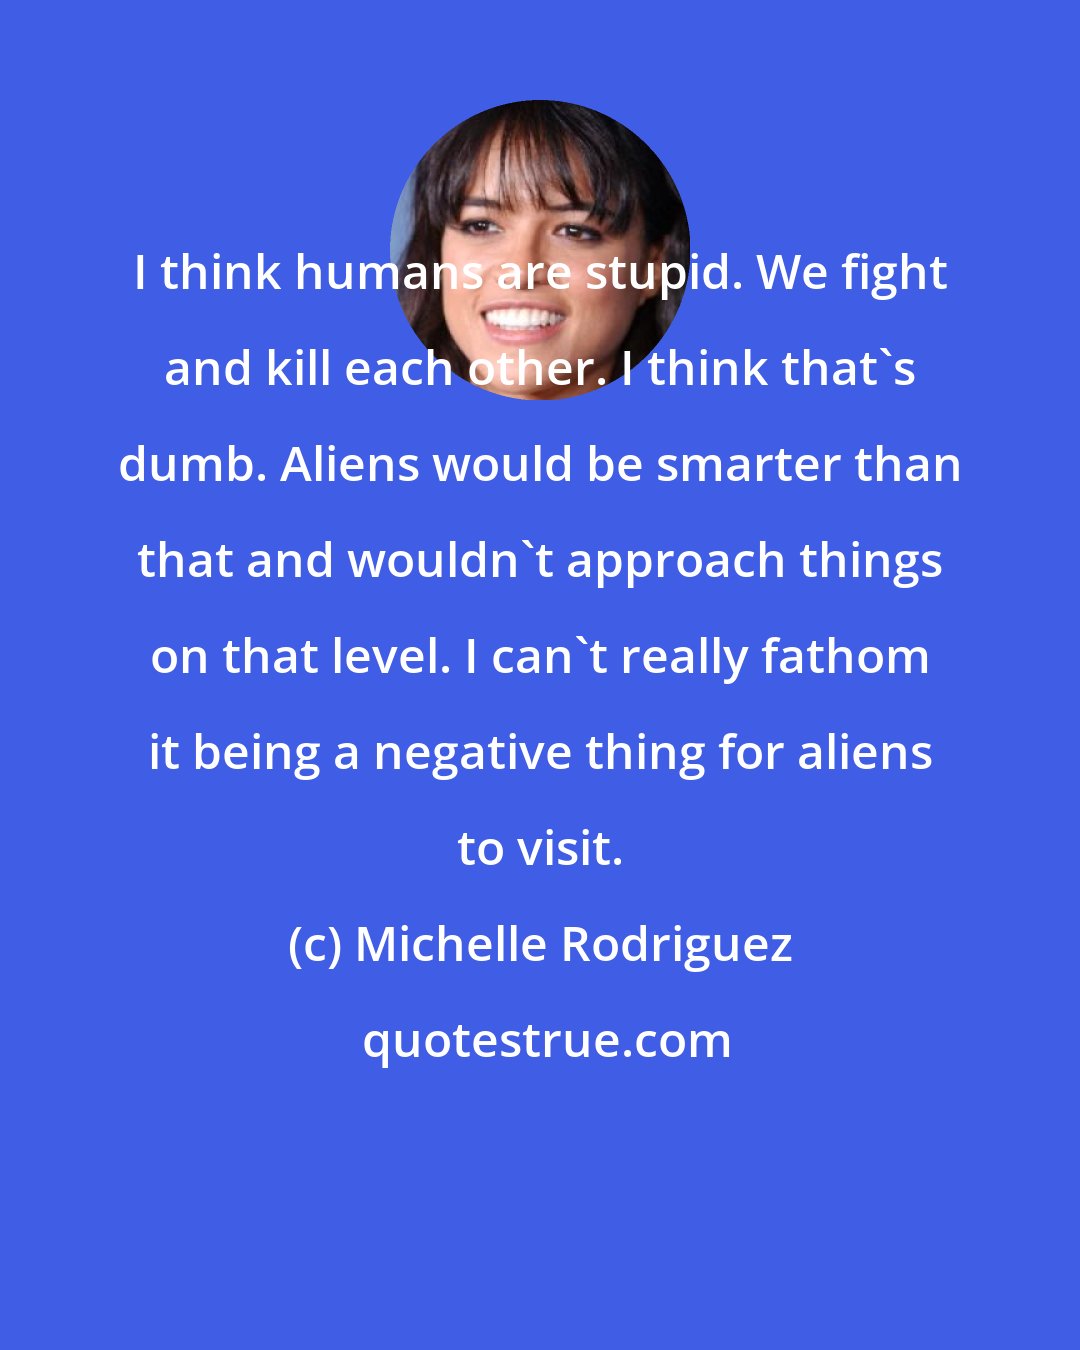 Michelle Rodriguez: I think humans are stupid. We fight and kill each other. I think that's dumb. Aliens would be smarter than that and wouldn't approach things on that level. I can't really fathom it being a negative thing for aliens to visit.